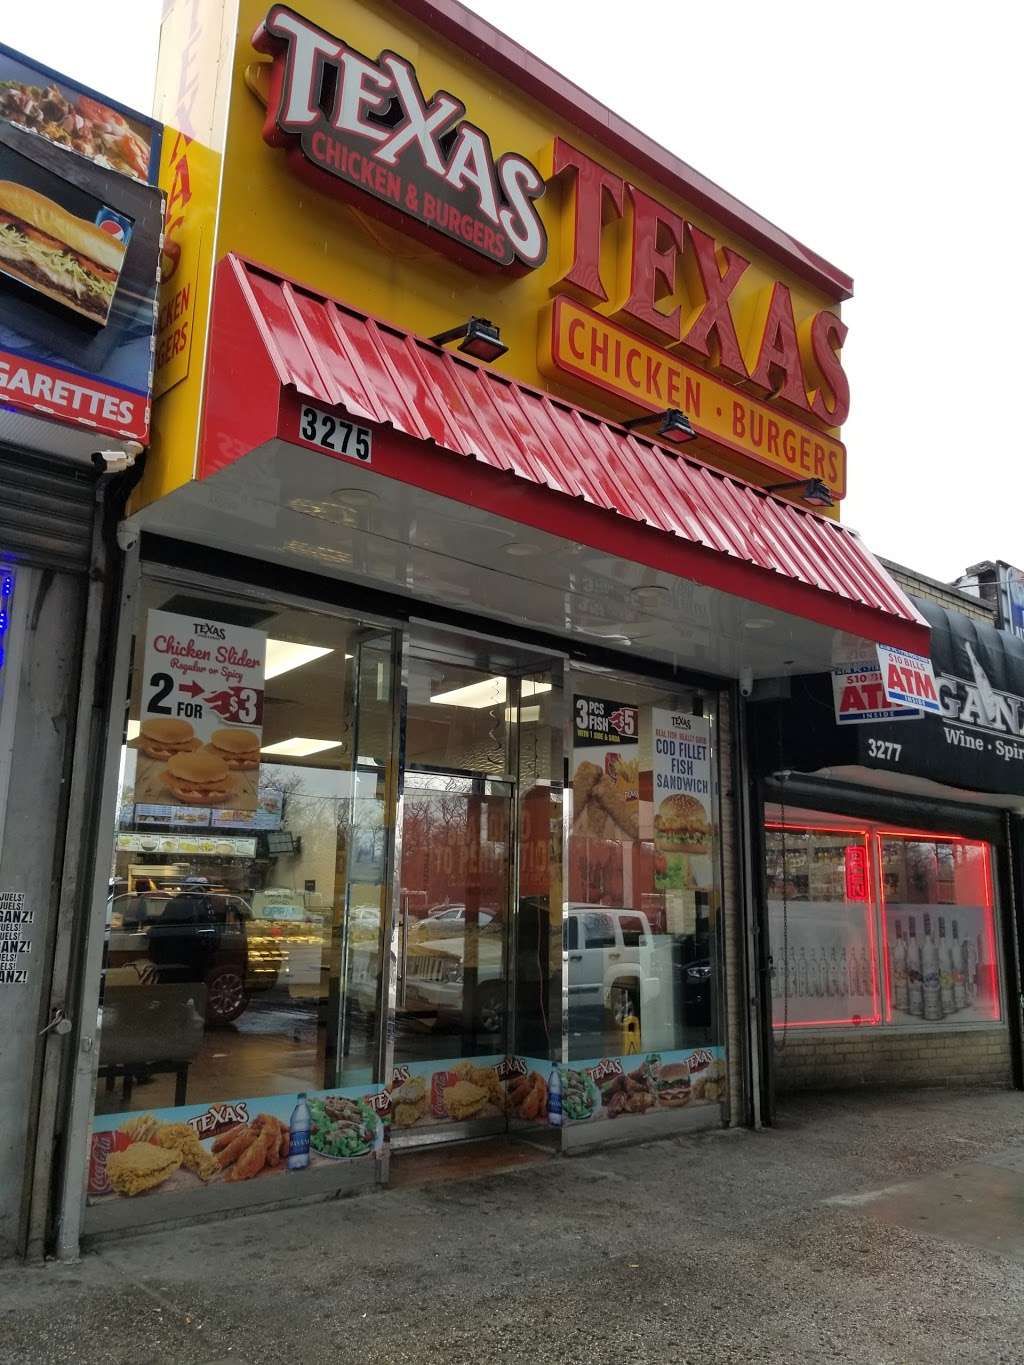 Texas Chicken & Burgers | 3275 Westchester Ave, The Bronx, NY 10461